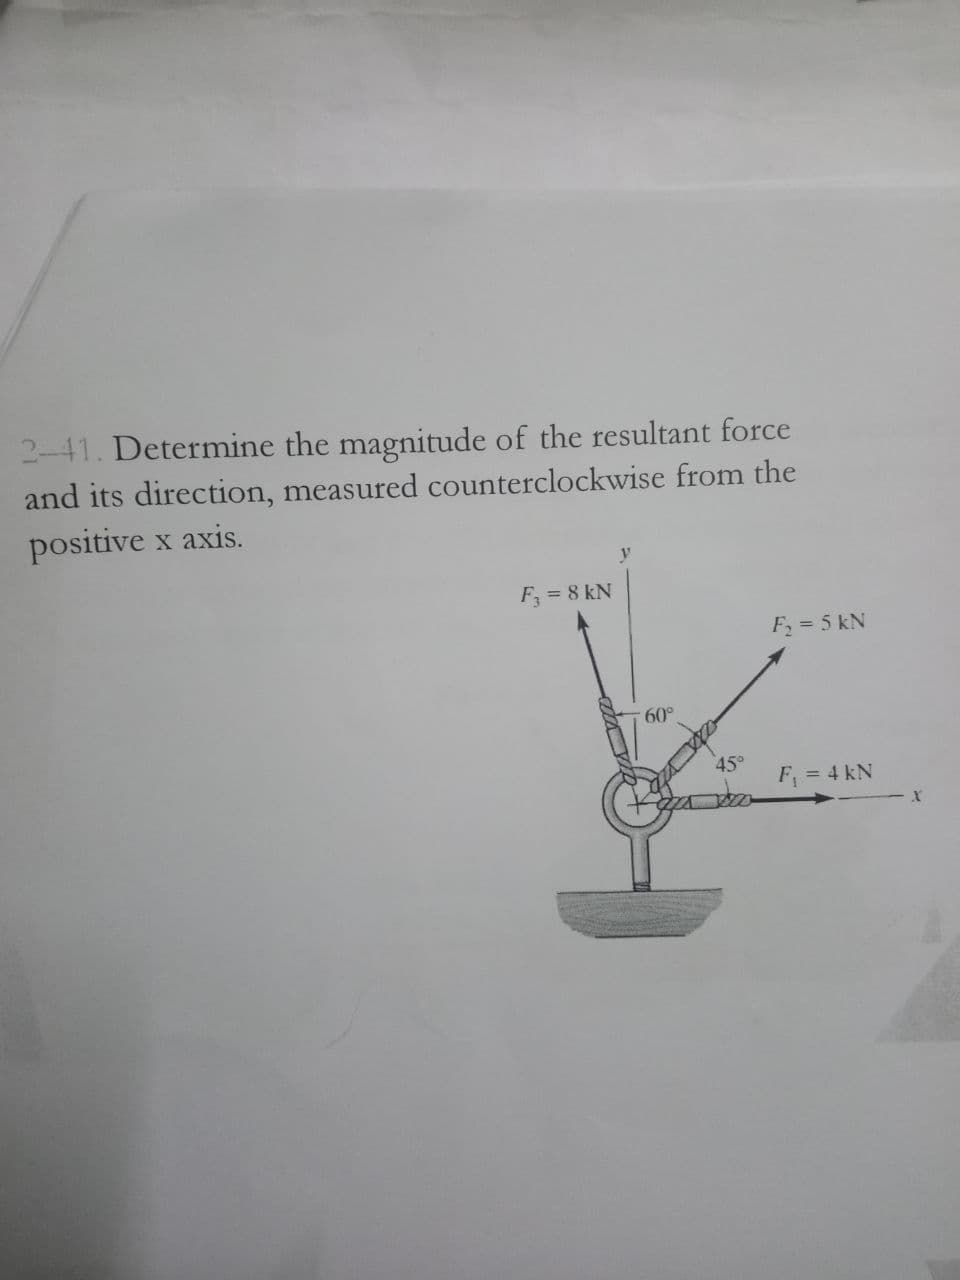 2-41. Determine the magnitude of the resultant force
and its direction, measured counterclockwise from the
positive x axis.
y
F = 8 kN
F = 5 kN
60°
45°
F = 4 kN
